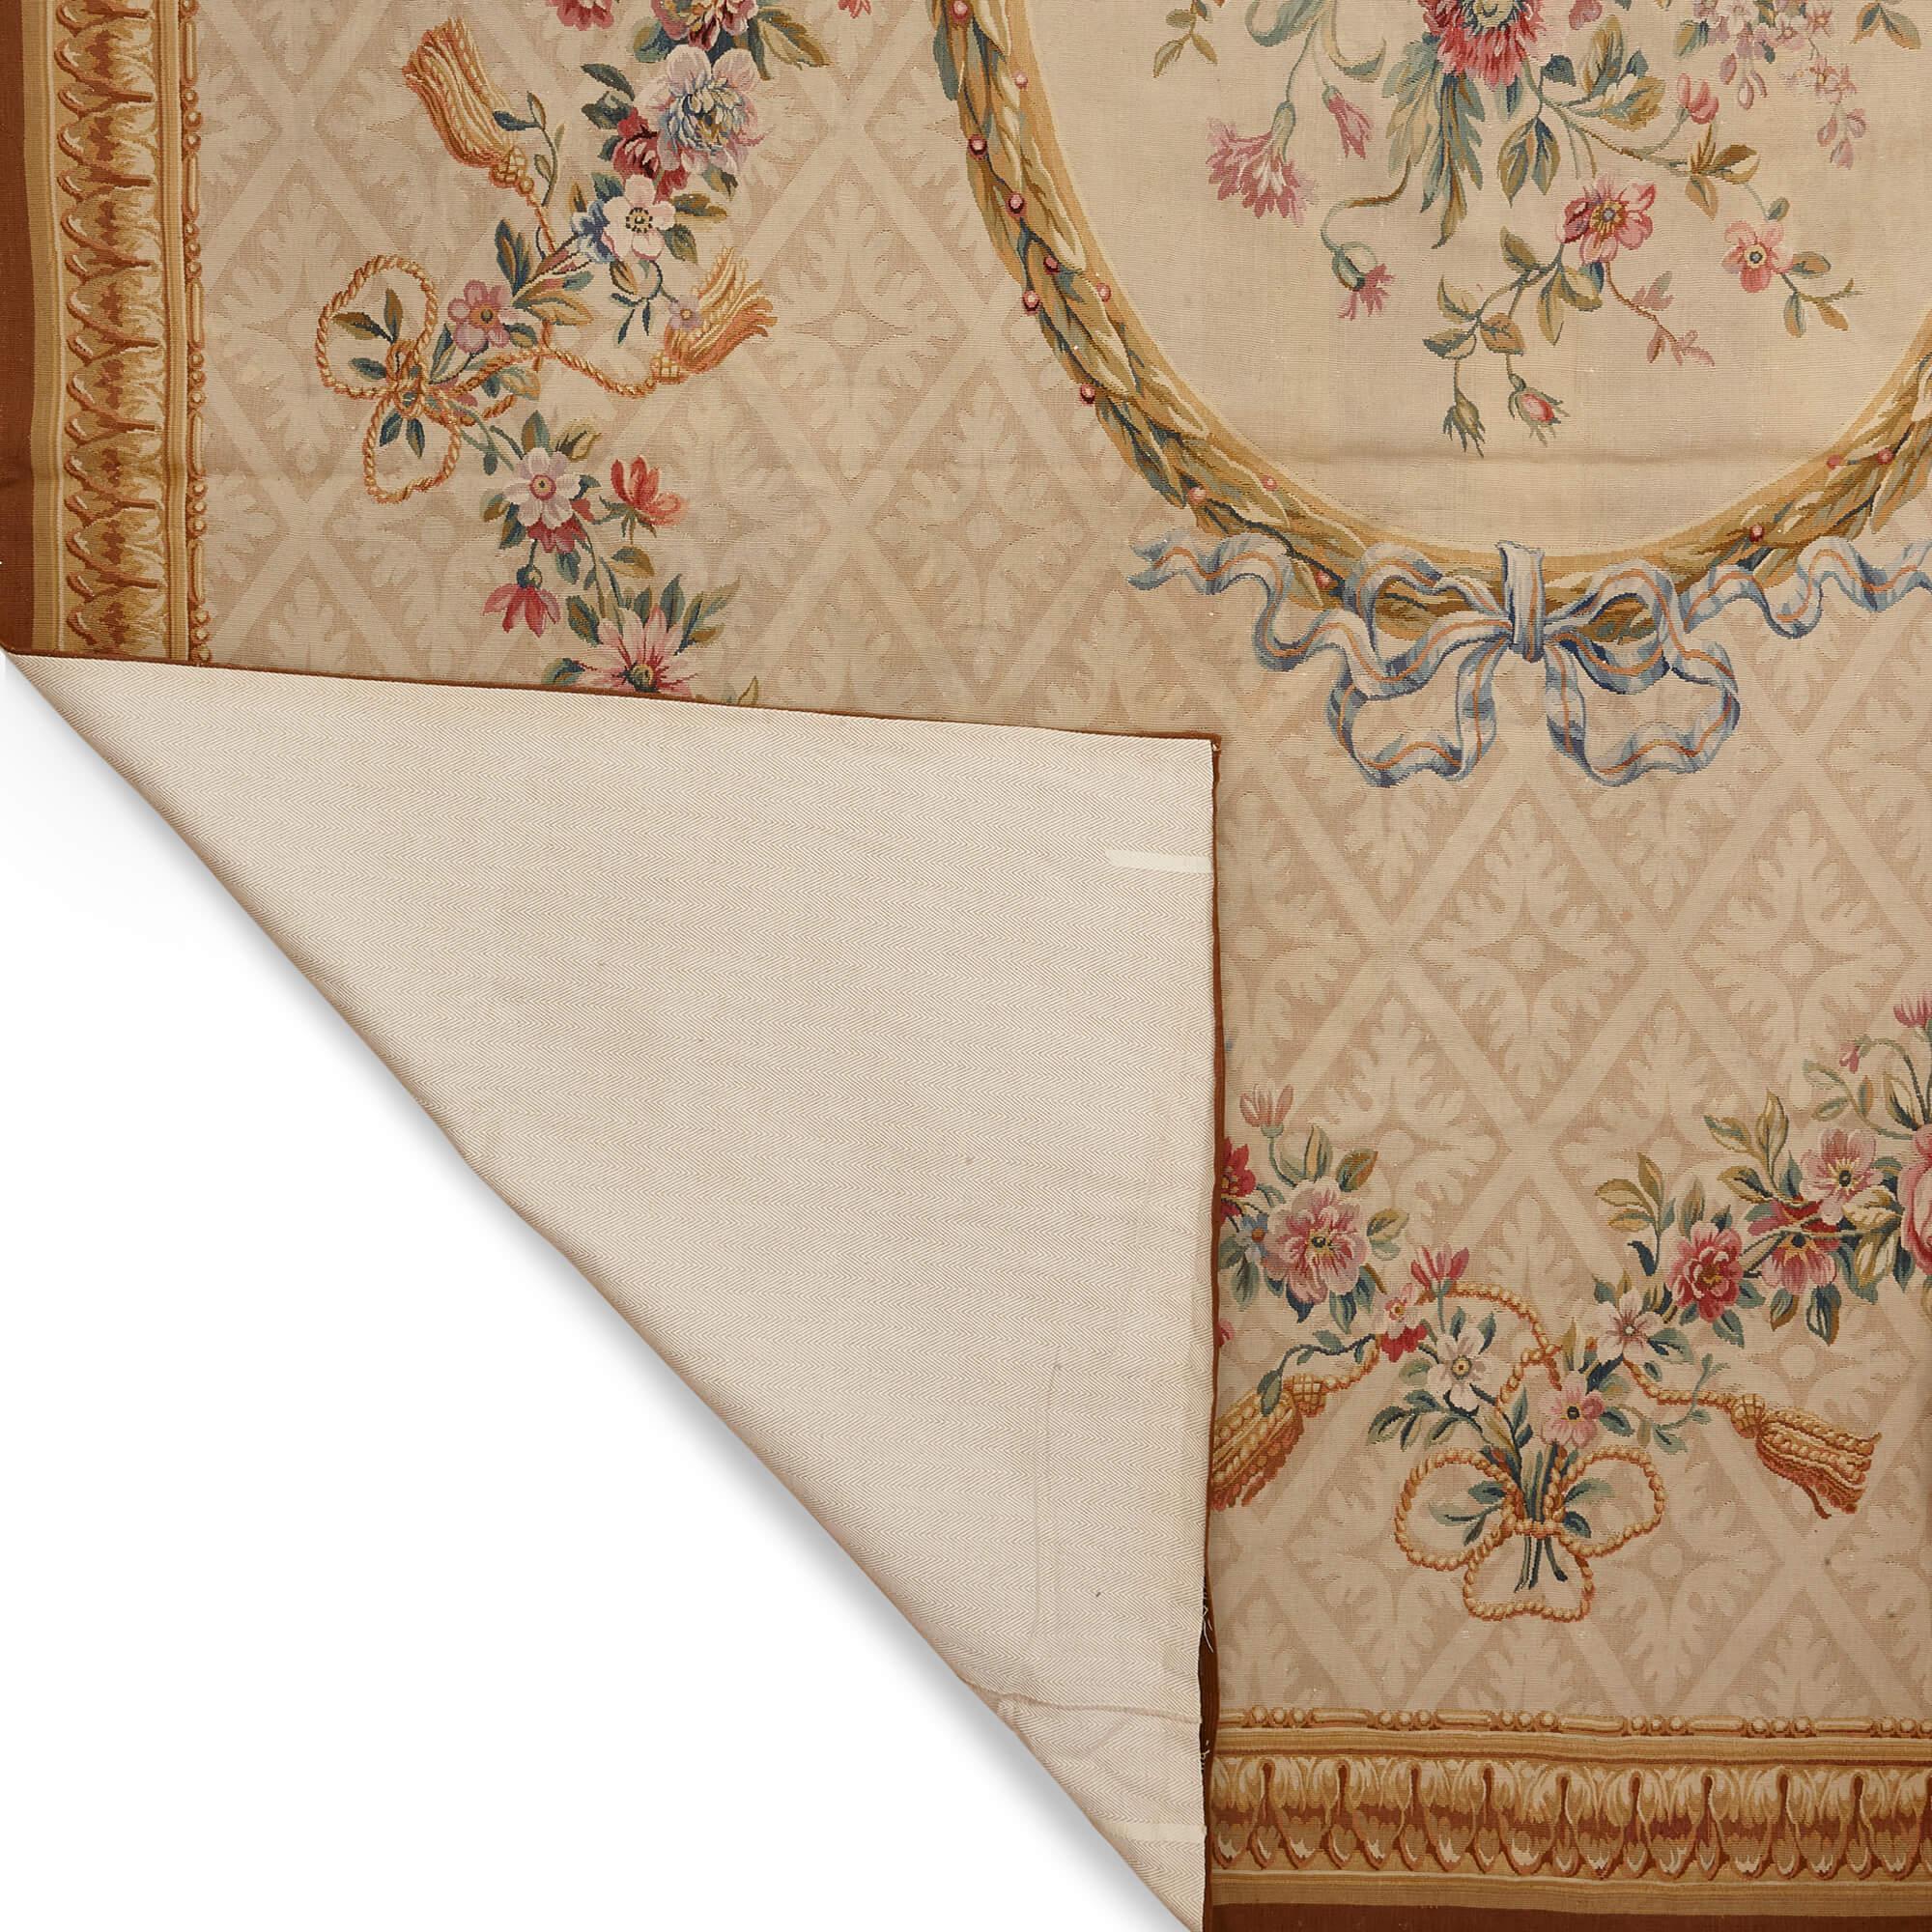 Very large and fine Aubusson floral carpet
French, c. 1870
Width 453cm, depth 320cm

This exquisite Aubusson carpet effortlessly captivates the viewer, serving as a tribute to the illustrious lineage of French carpet artistry.

At the core of this